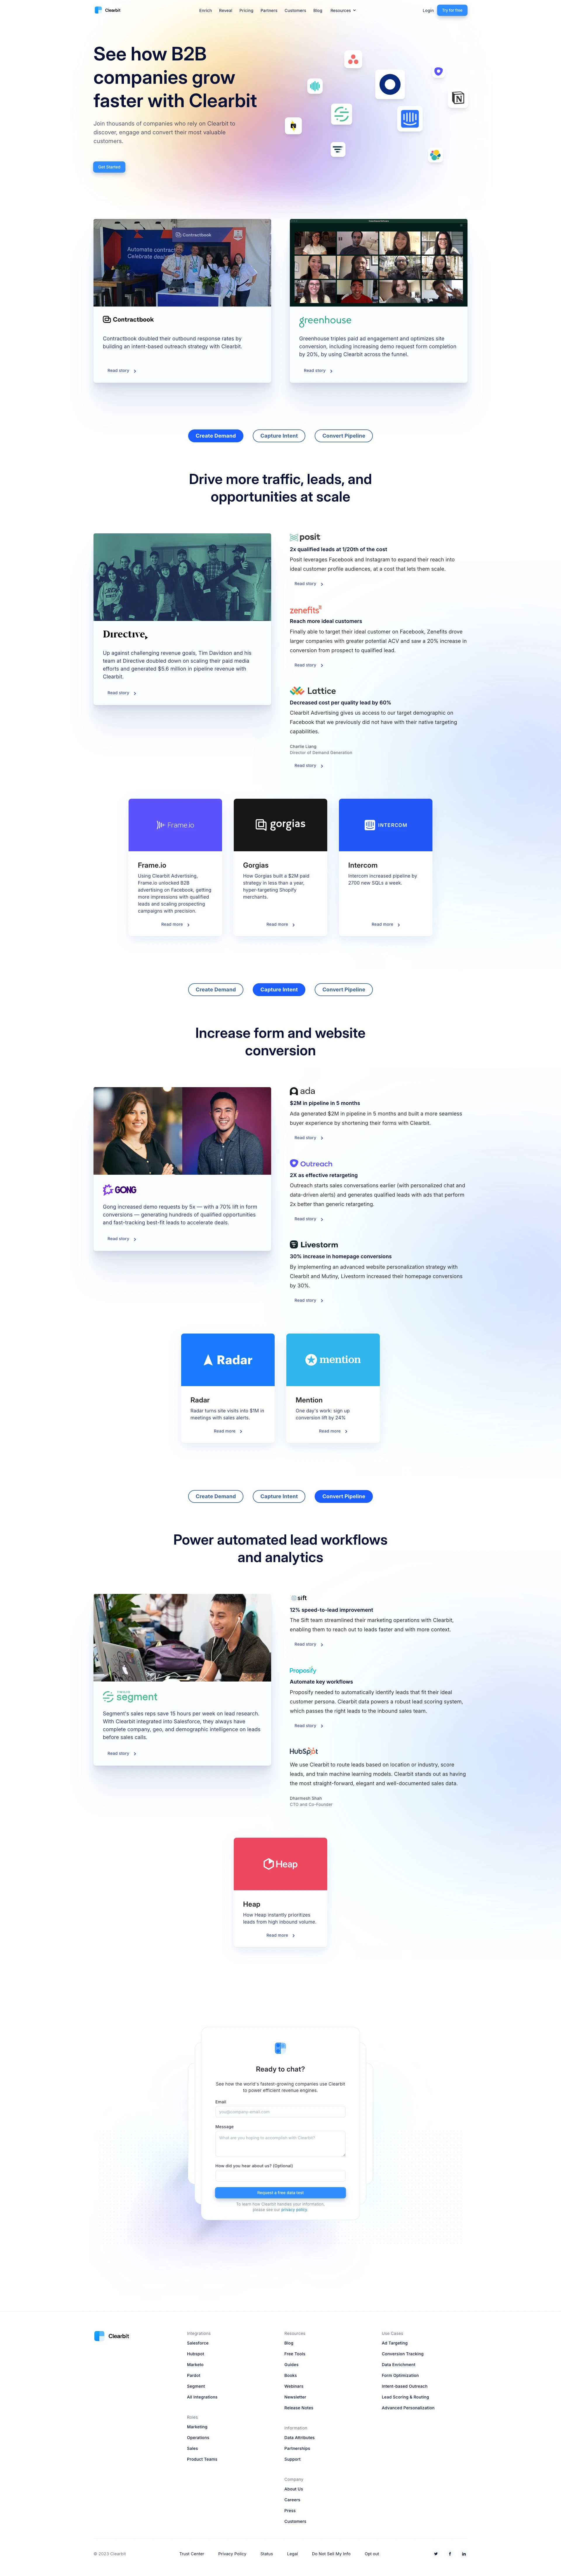 Clearbit Landing Page Example: Clearbit provides go-to-market teams with the industry’s most comprehensive B2B dataset across company, contact, and IP intelligence. Use our full dataset to enrich key systems, build products, and power personalization.